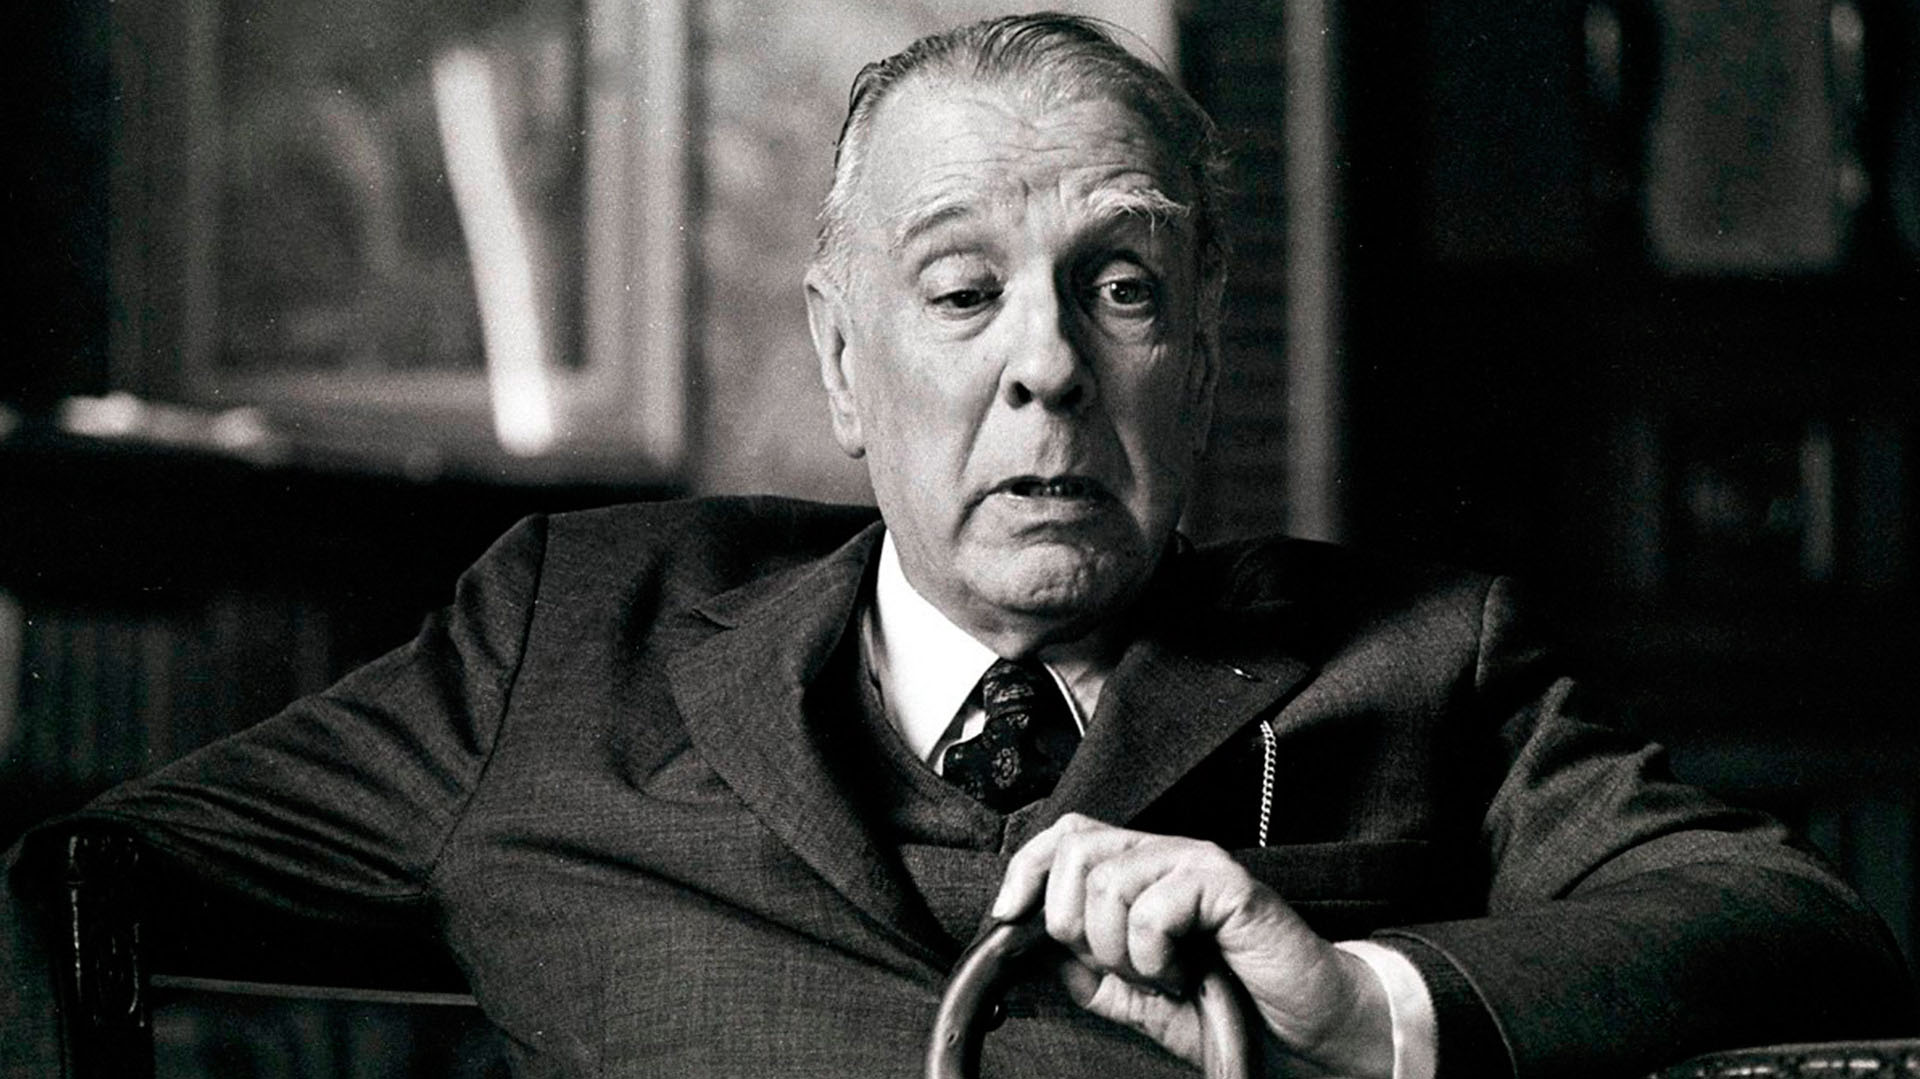 Jorge Luis Borges, the best positioned Argentine among the 100 books of all time.